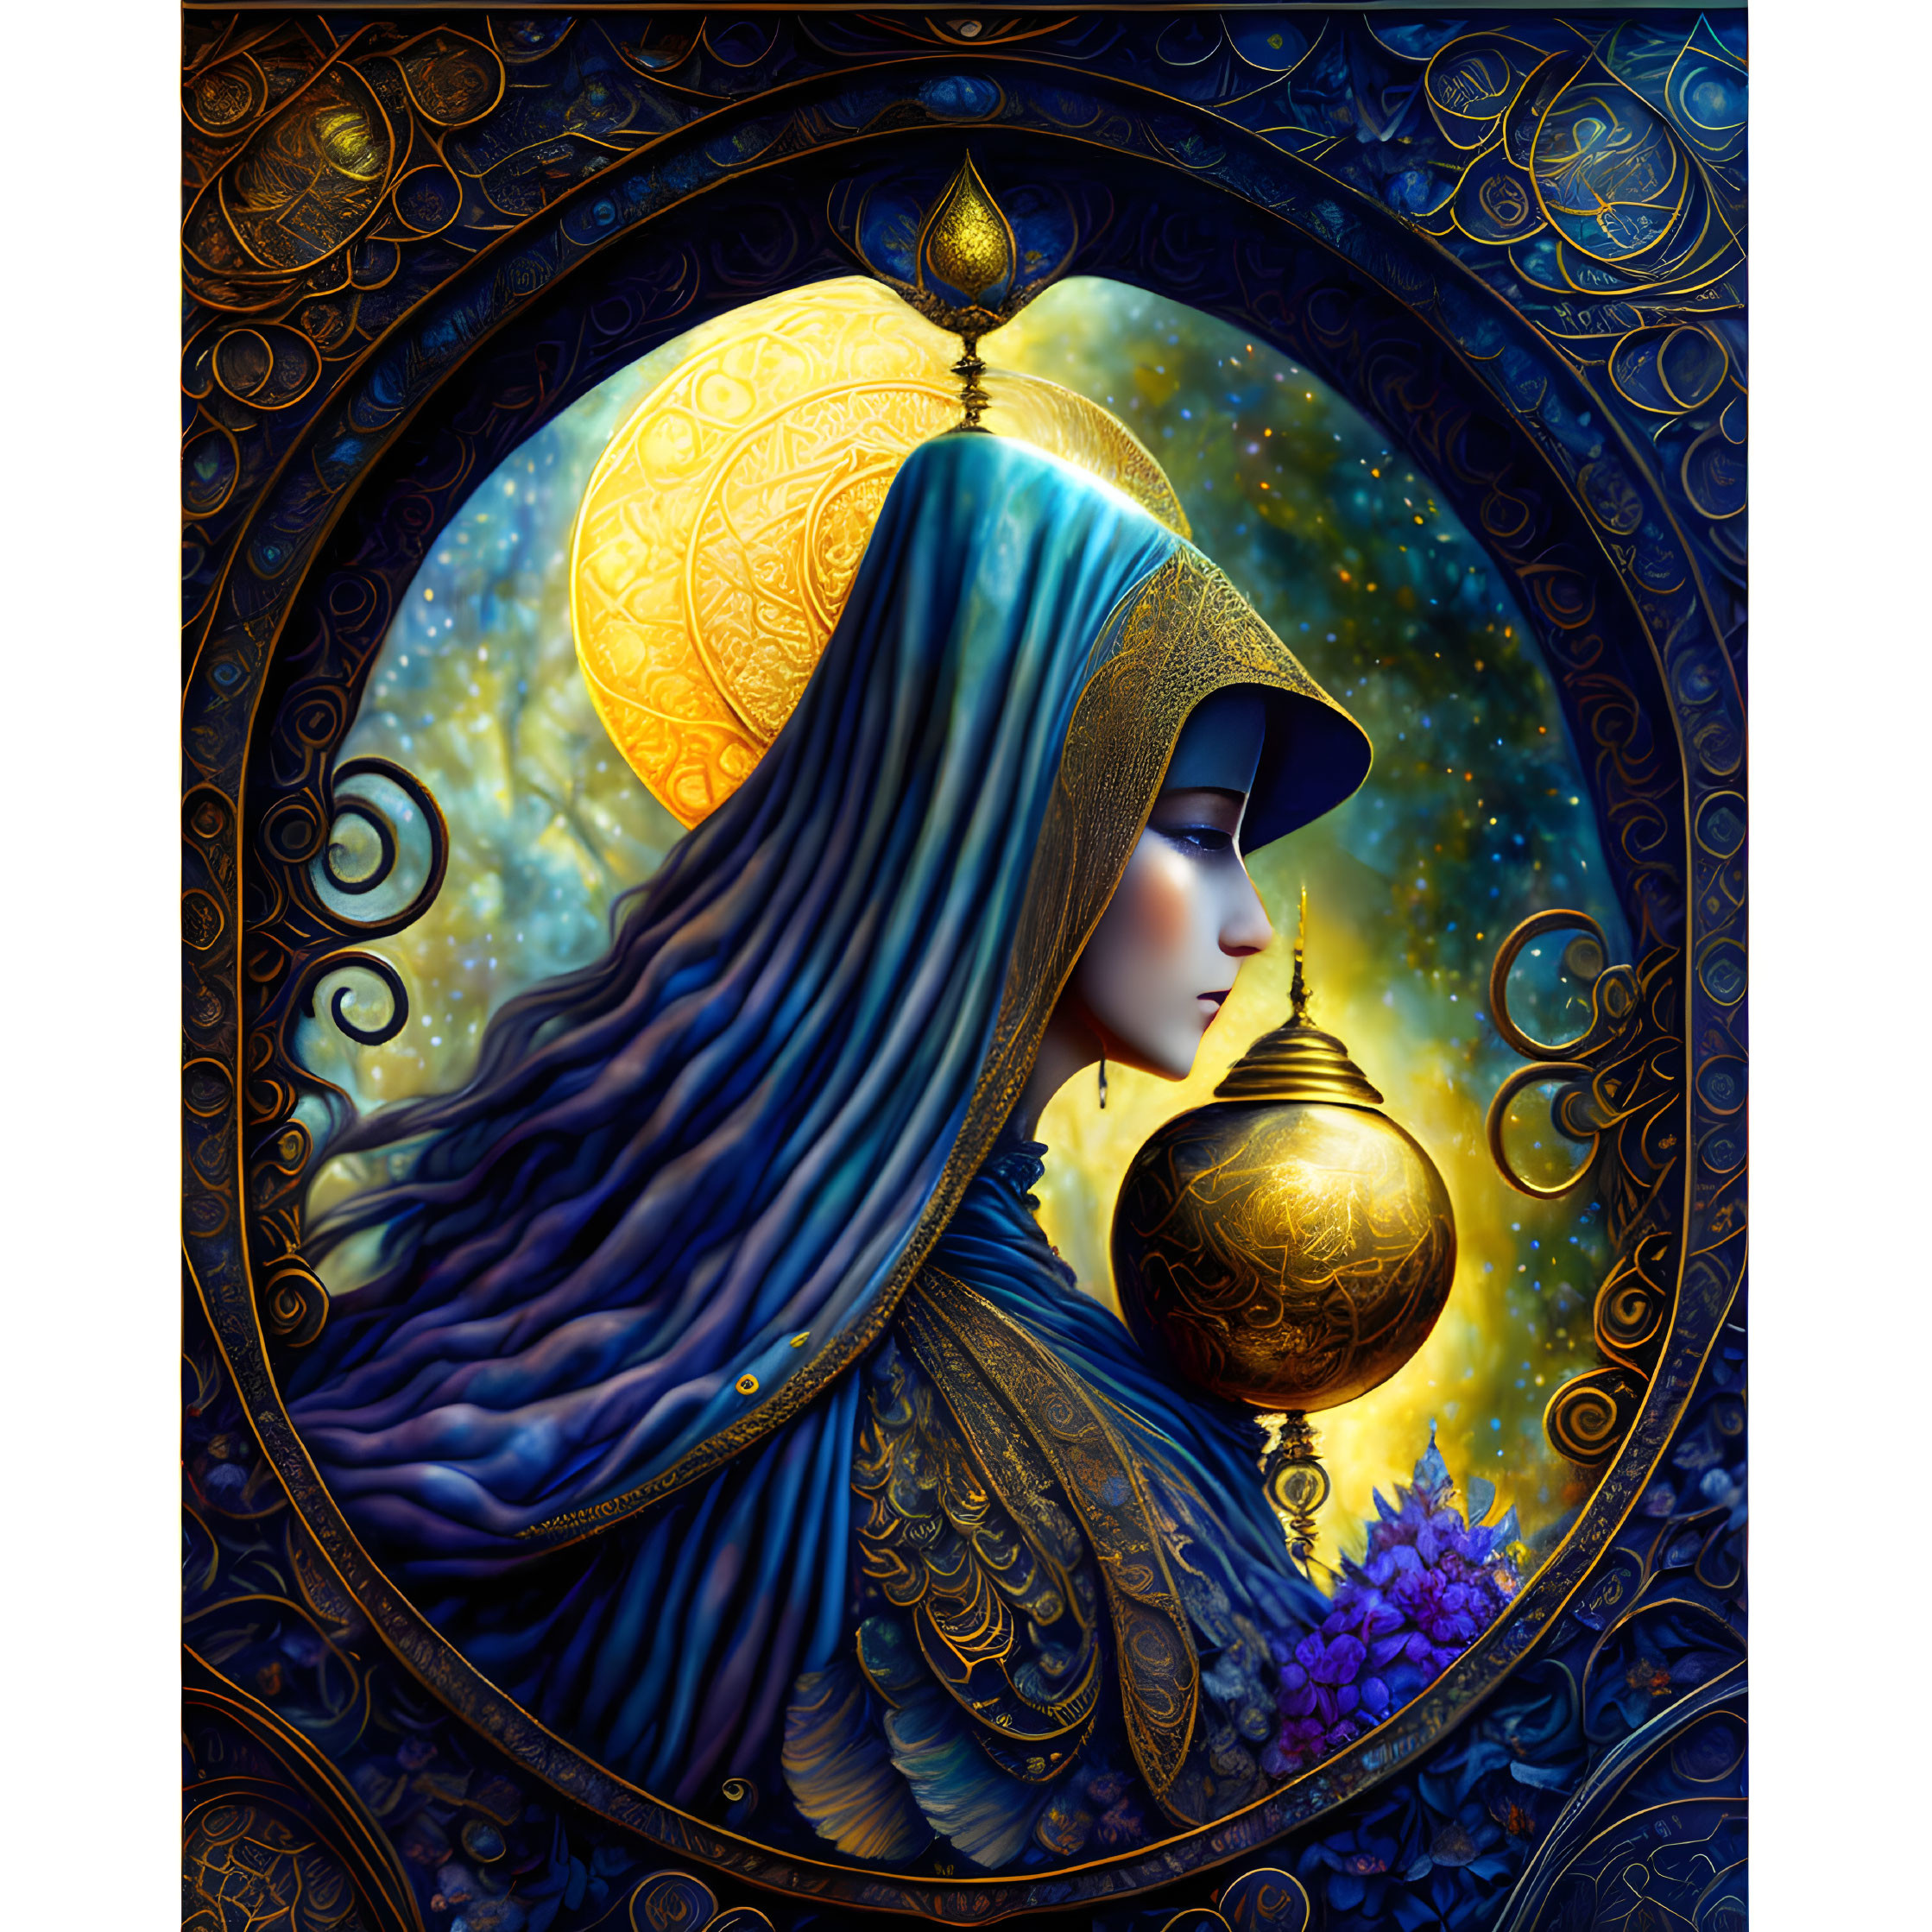 Mystical woman with lantern in starry blue cloak and full moon.